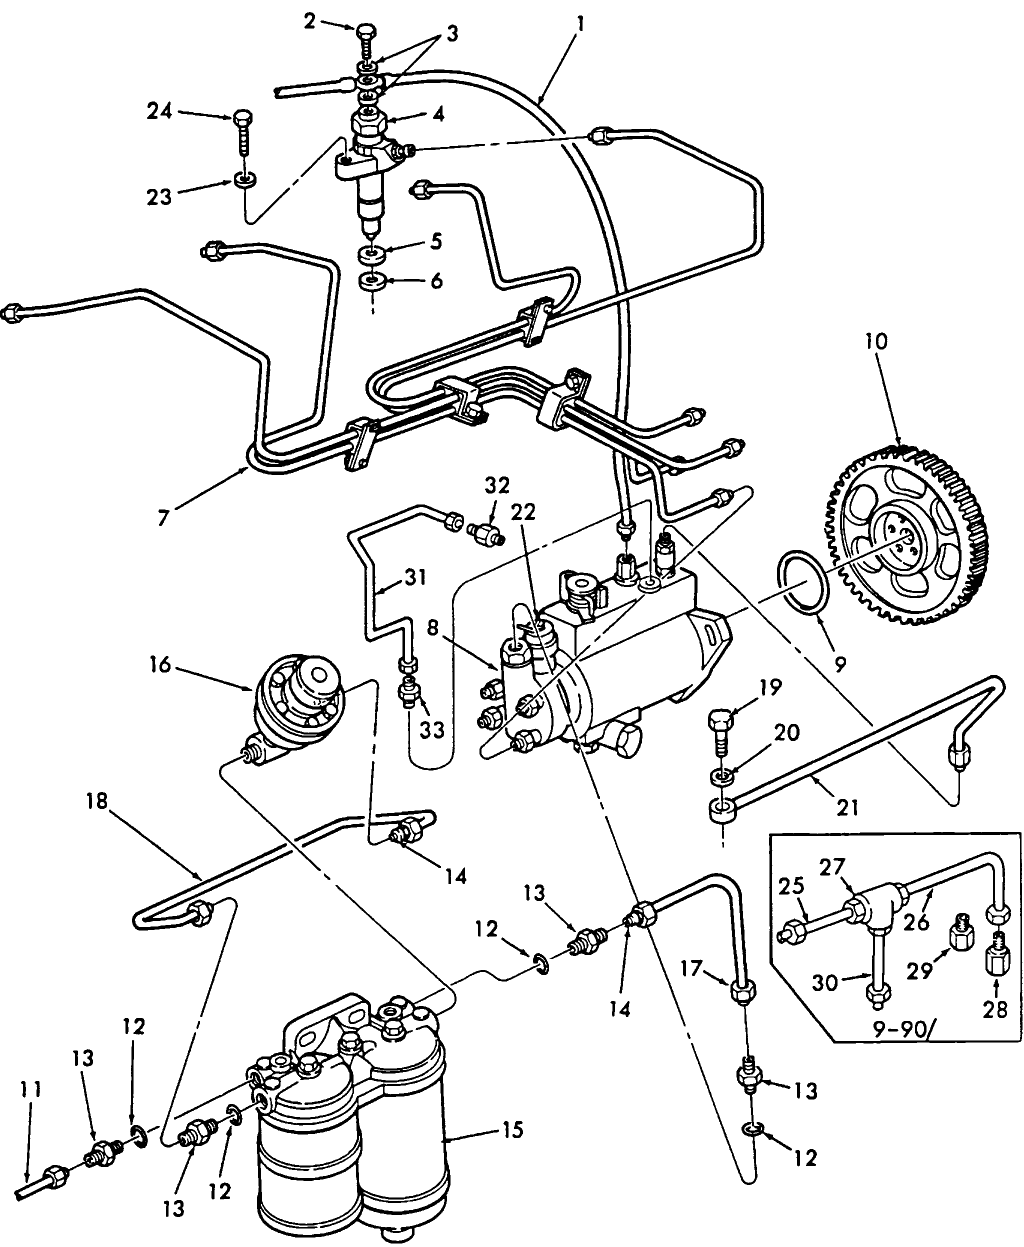 09A01 FUEL SYSTEM